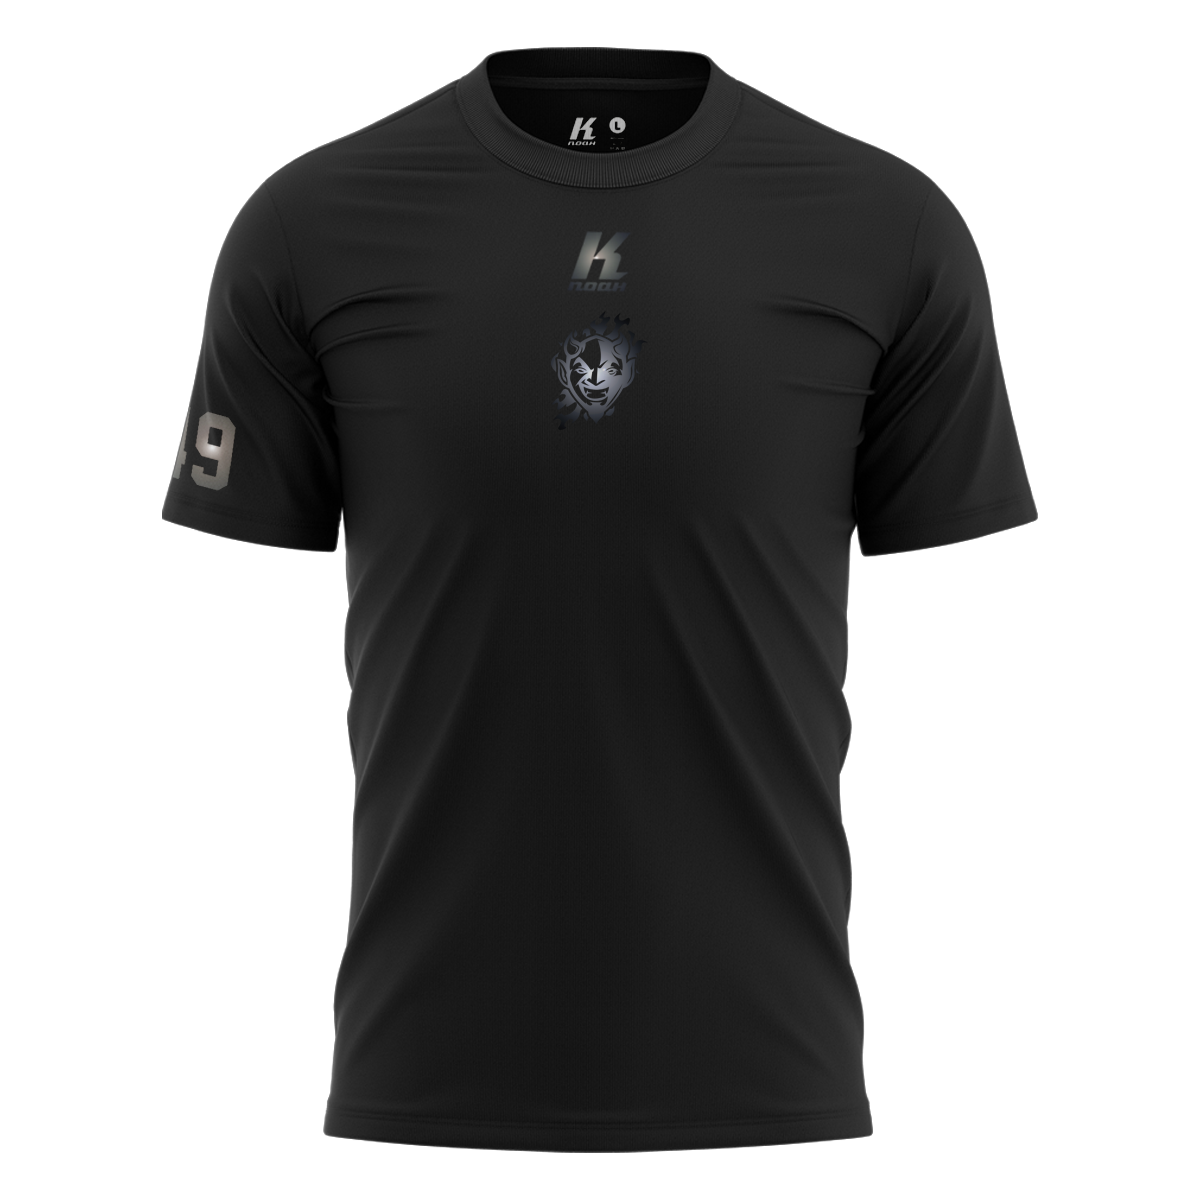 Demons "Blackline" K.Tech Sports Tee S8000 with Playernumber/Initials